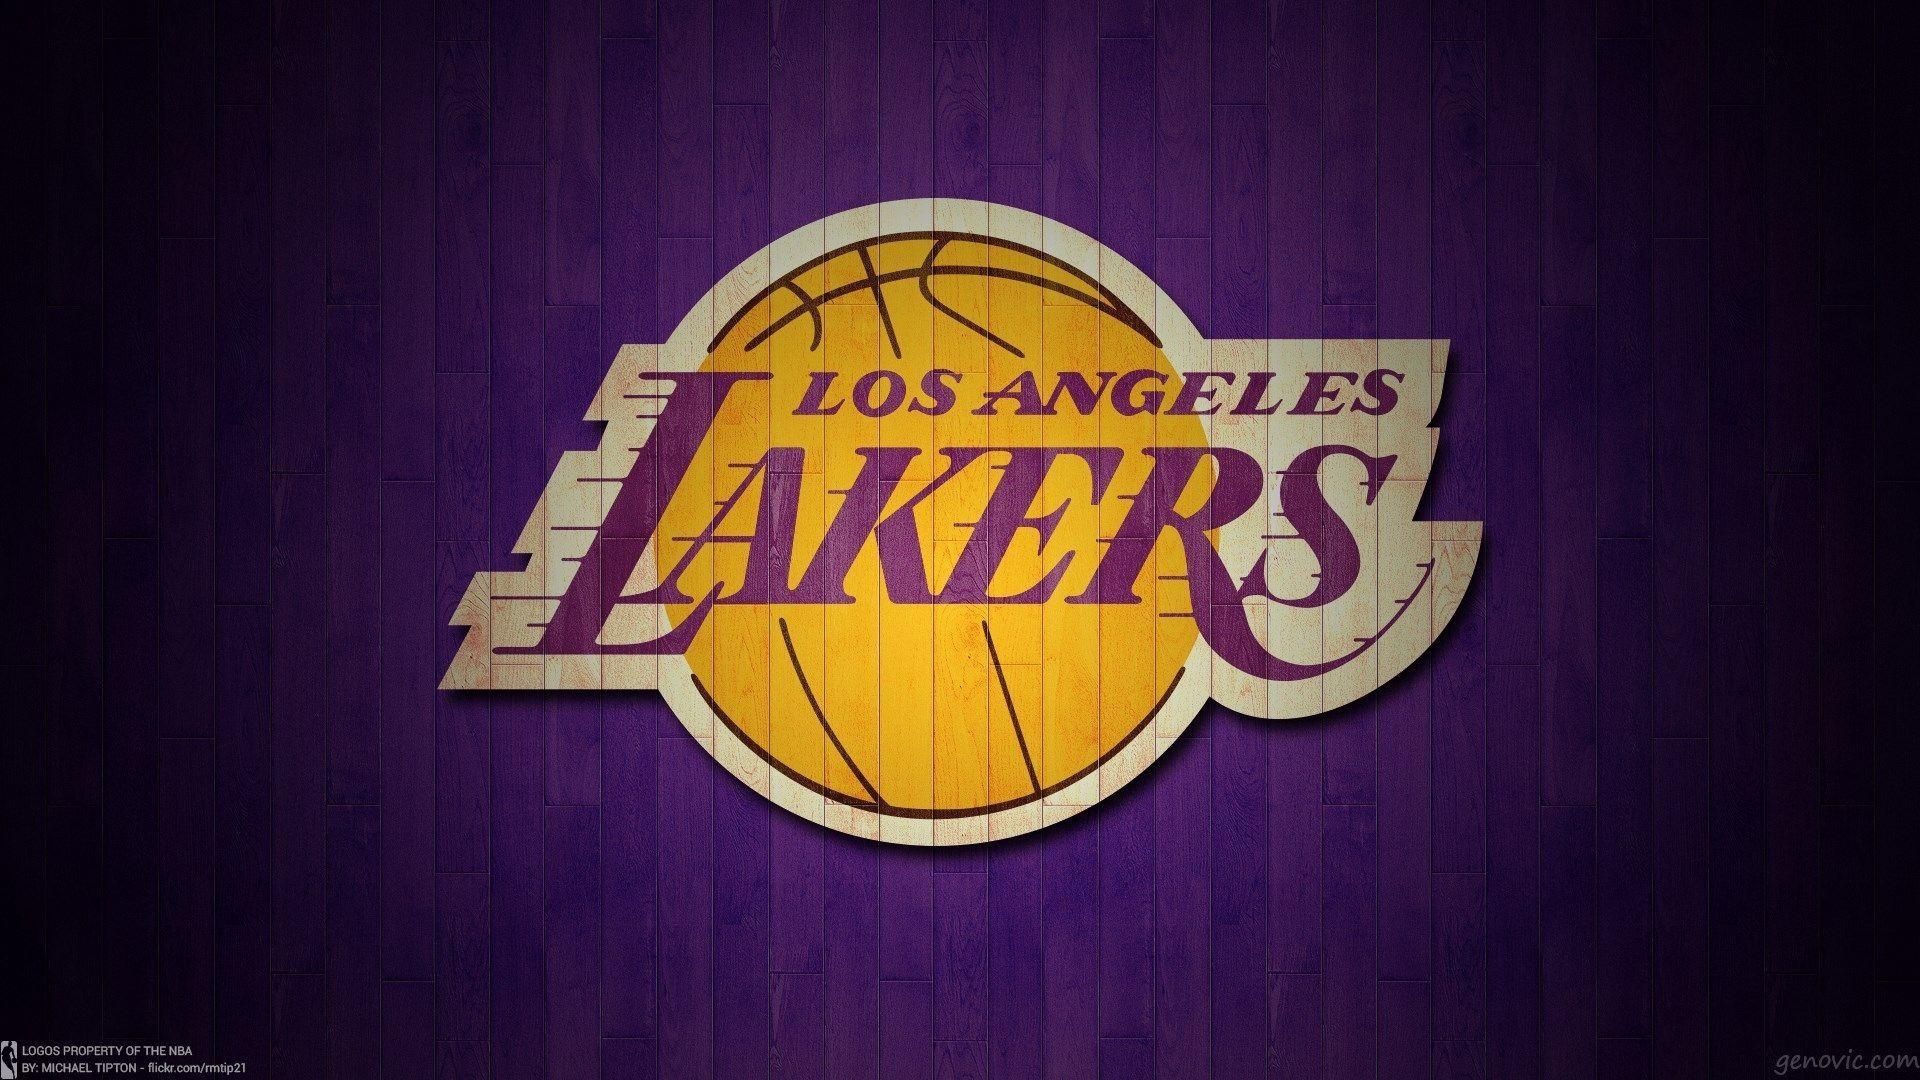 nba wallpaper hd for android,logo,text,font,graphic design,graphics